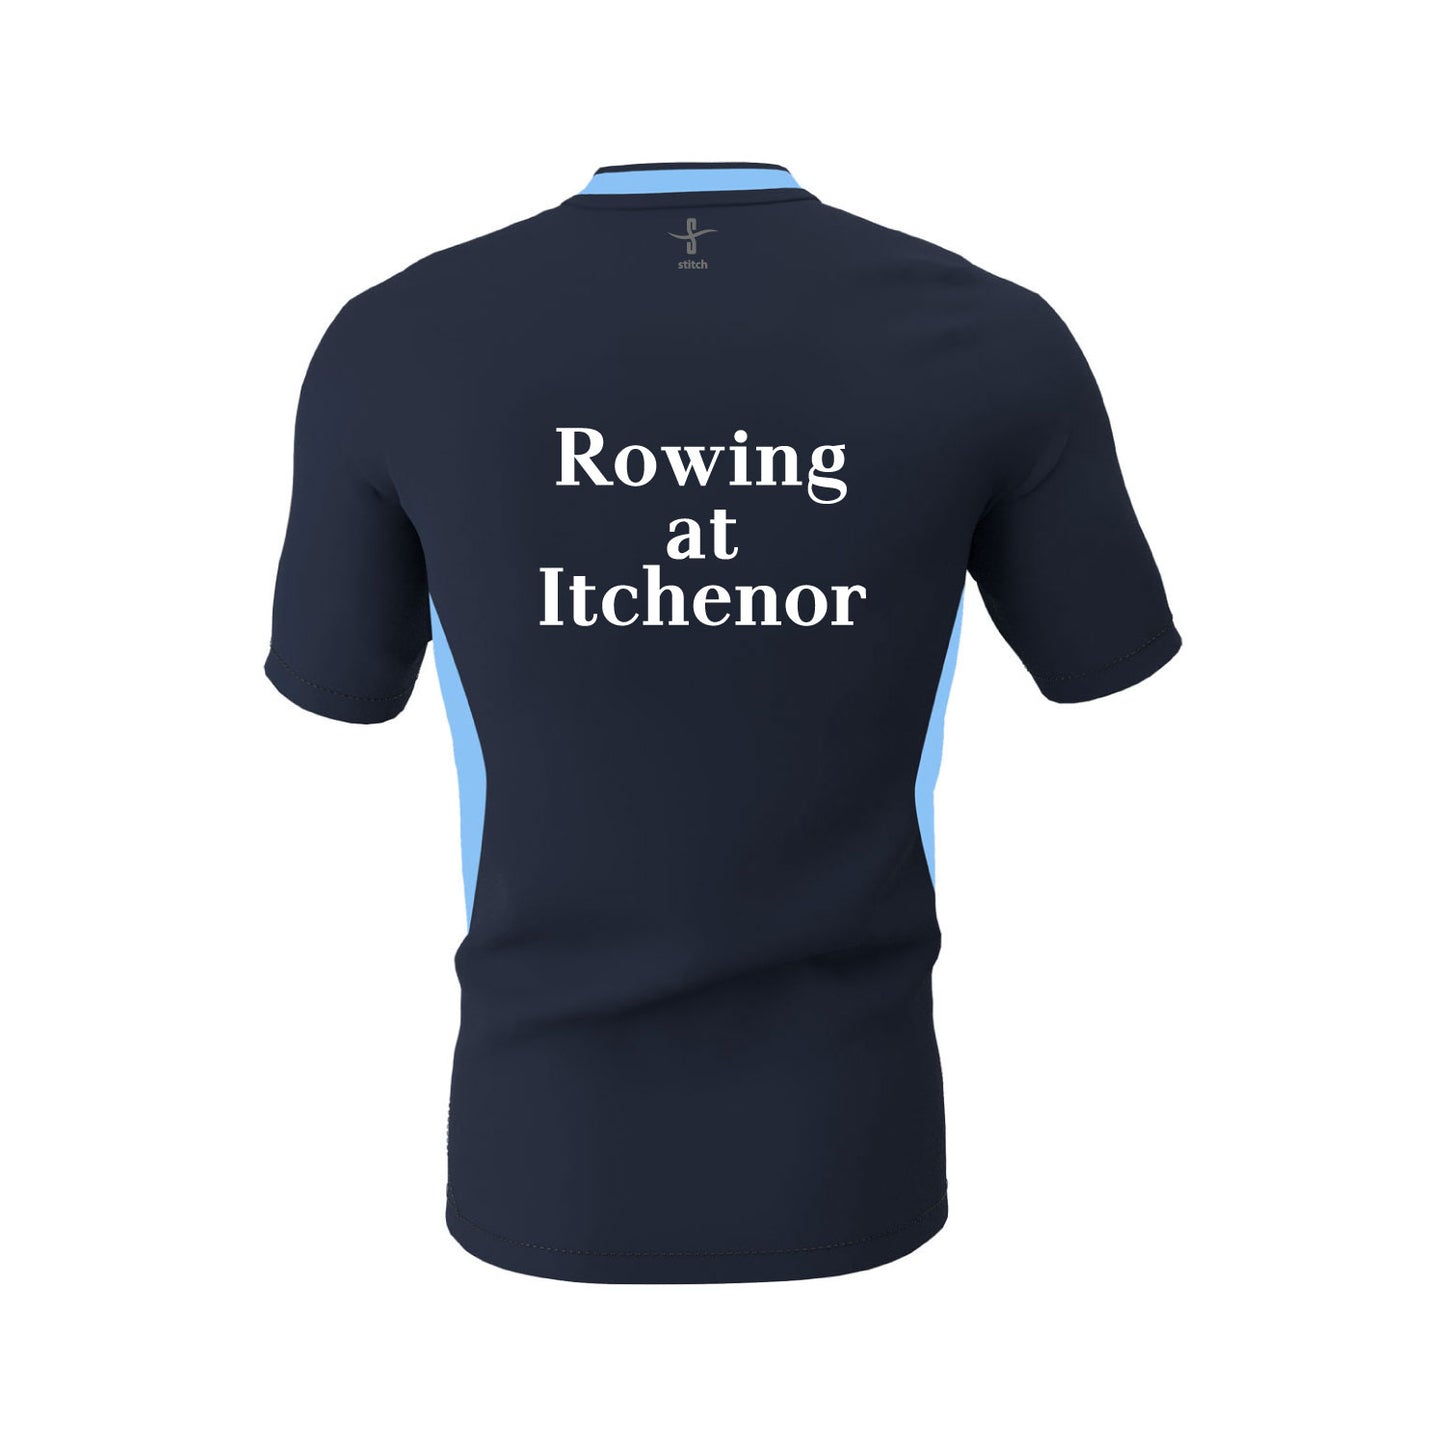 Rowing at Itchenor Contrast T Shirt